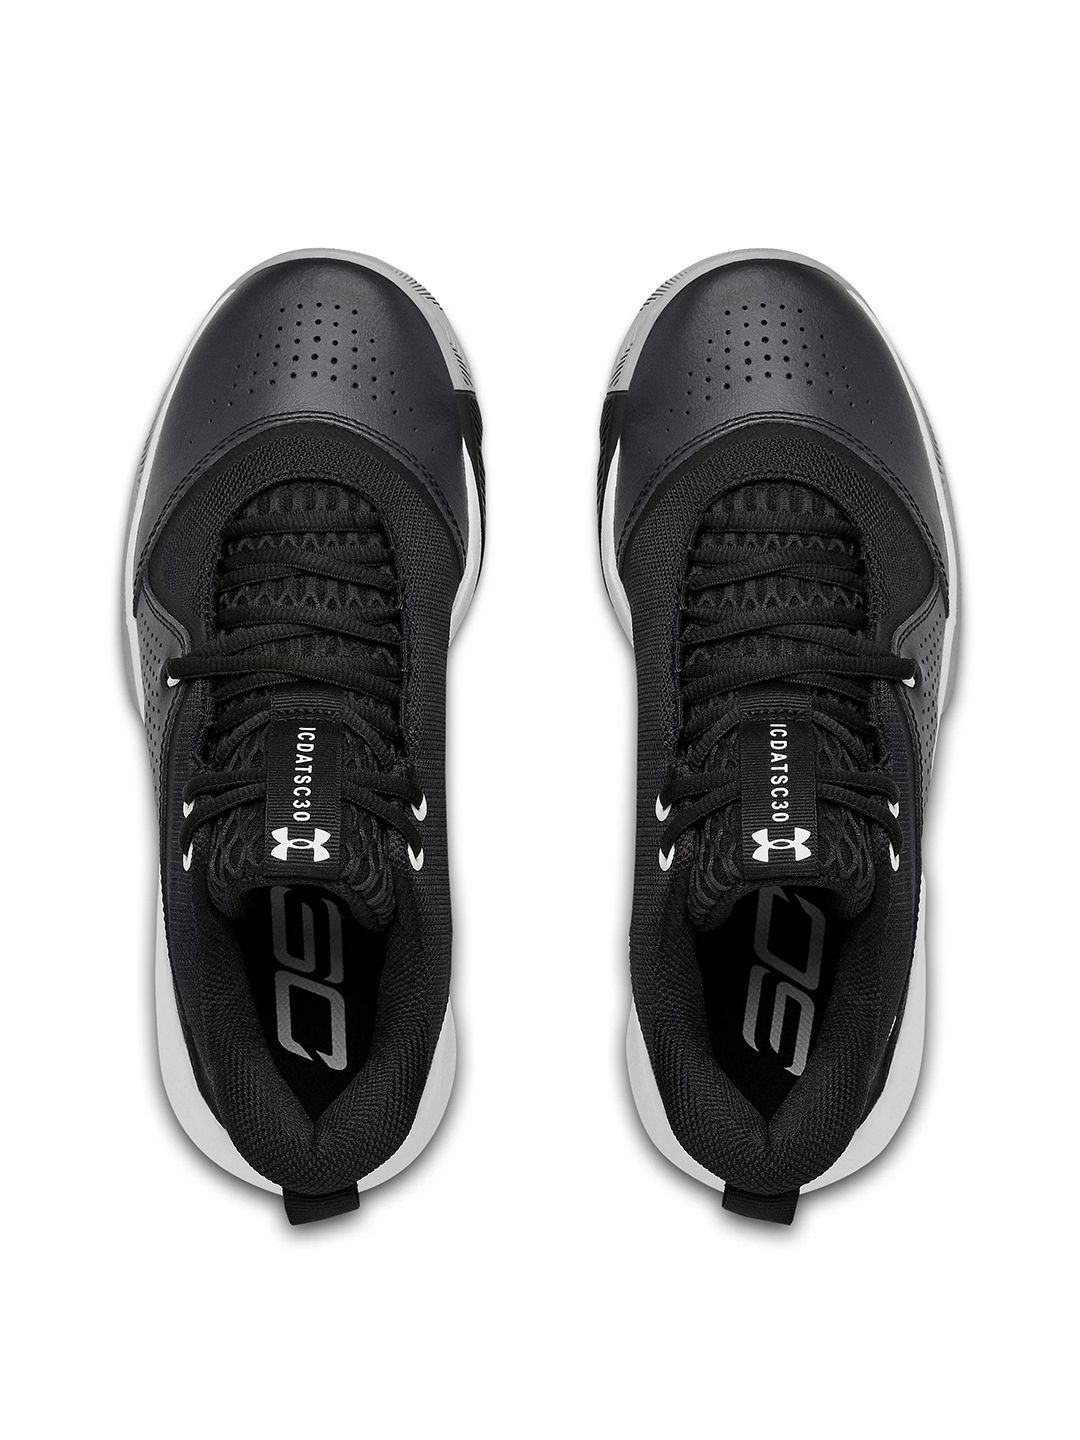 UNDER ARMOUR Unisex Black 3ZER0 IV Basketball Shoes Price in India